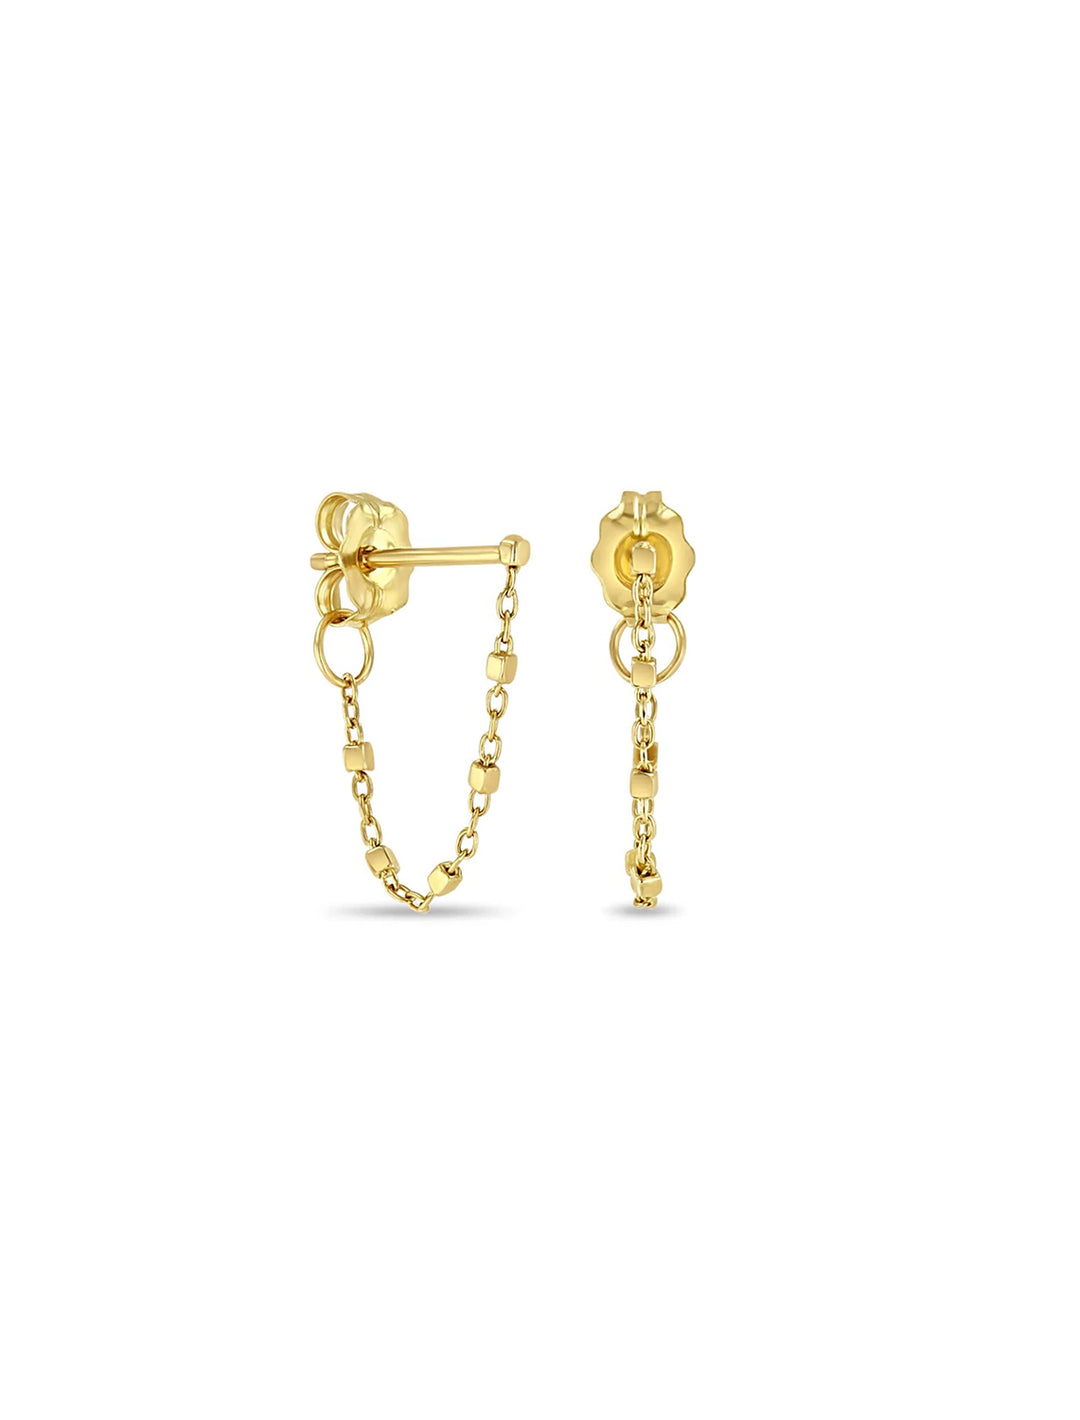 14k tiny cable and bead chain earrings